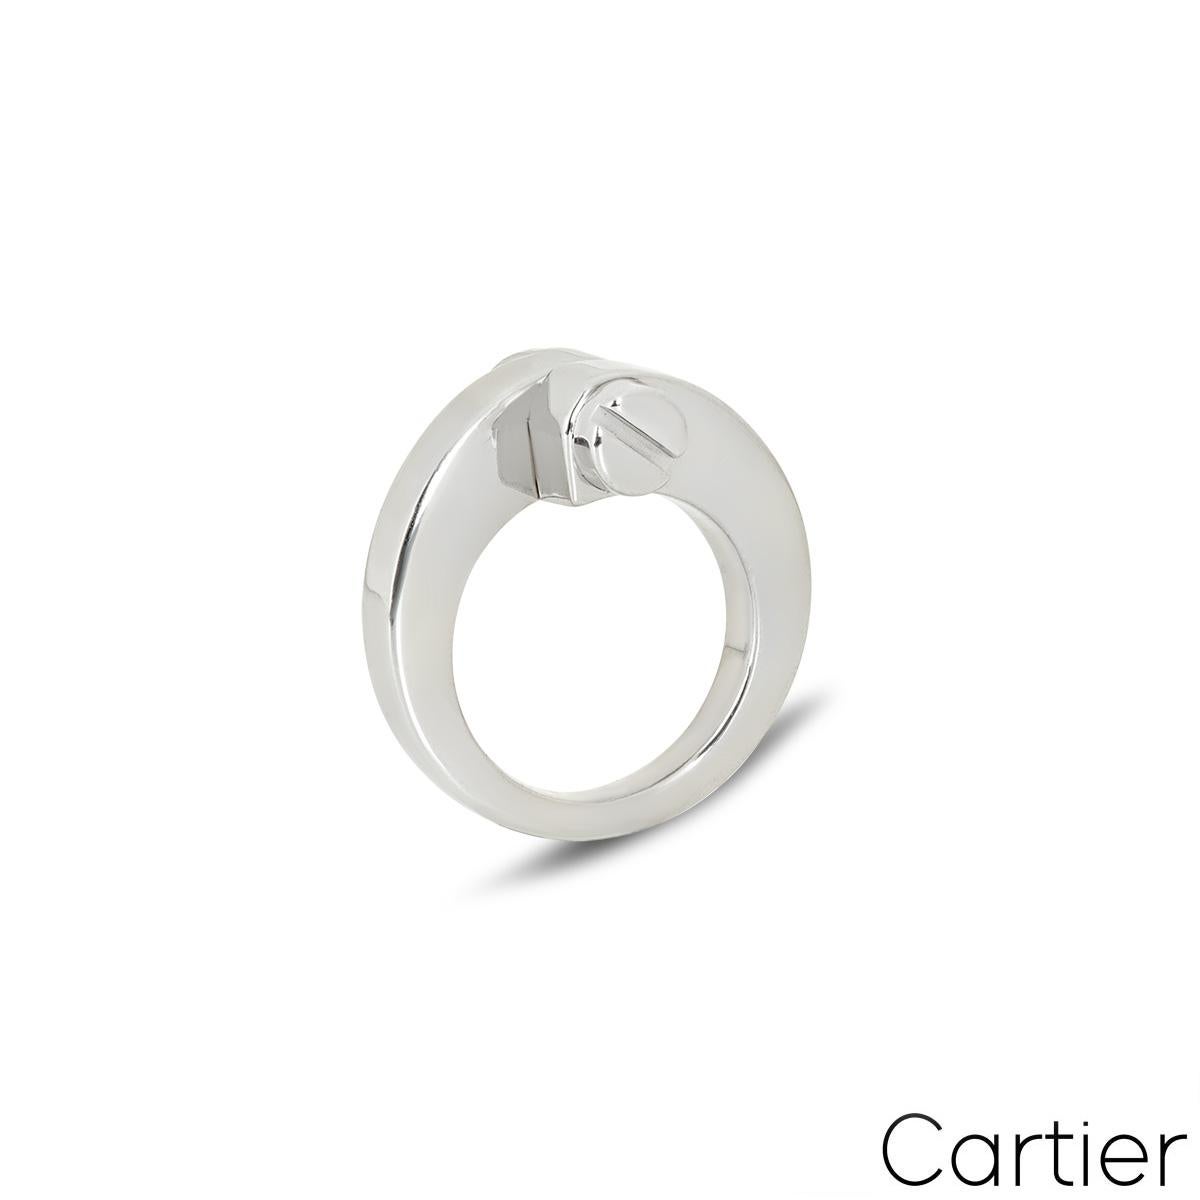 A trendy 18k white gold Cartier ring from the Menotte collection. The ring features two screw motif terminations at the centre. The ring tapers down from 11mm to 3mm, is a UK size I, US size 4.25/ EU size 47 and has a gross weight of 13.75